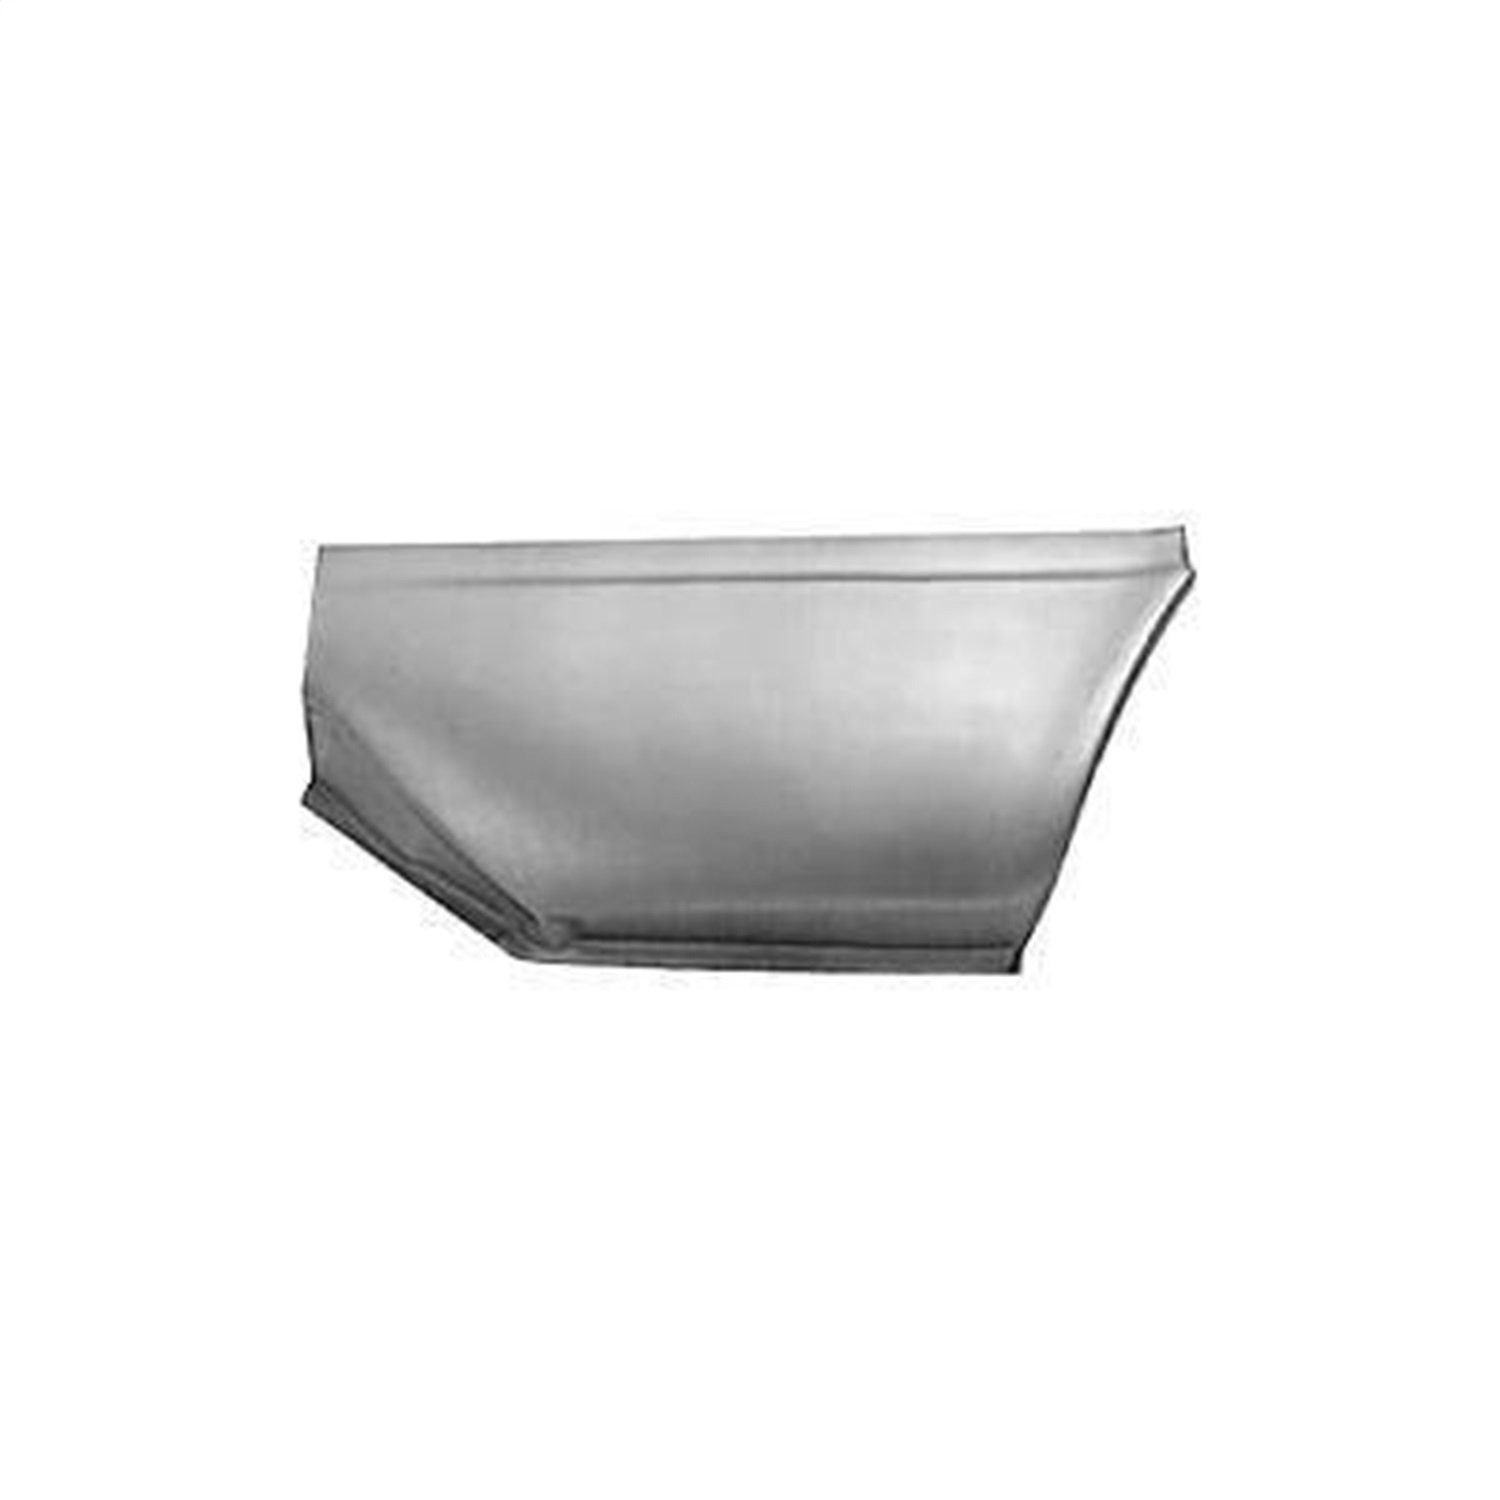 Lower Rear Quarter Panel Section 1964-1966 Ford Mustang